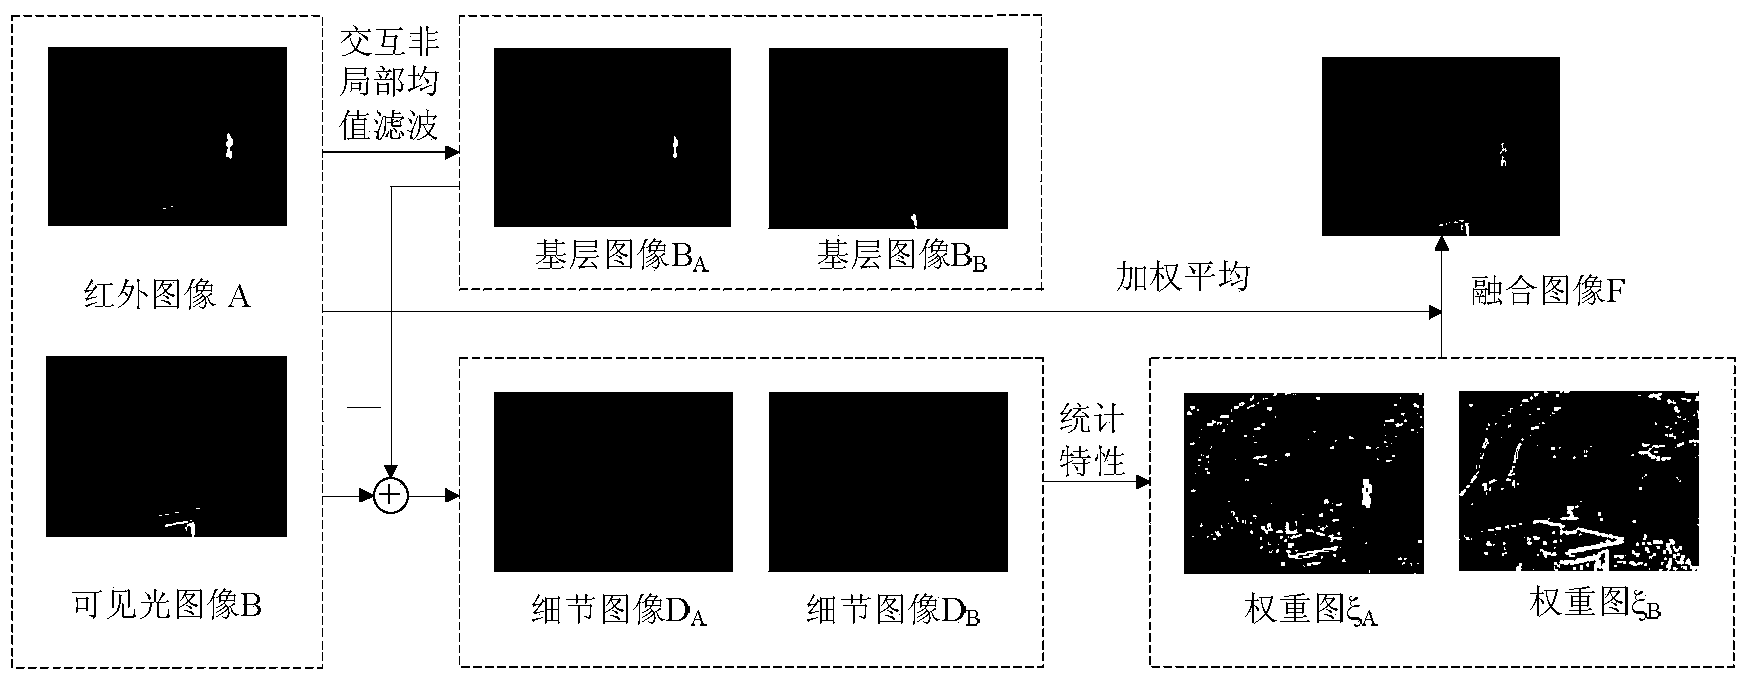 Infrared light image and visible light image fusion method based on interactive non-local average filtering